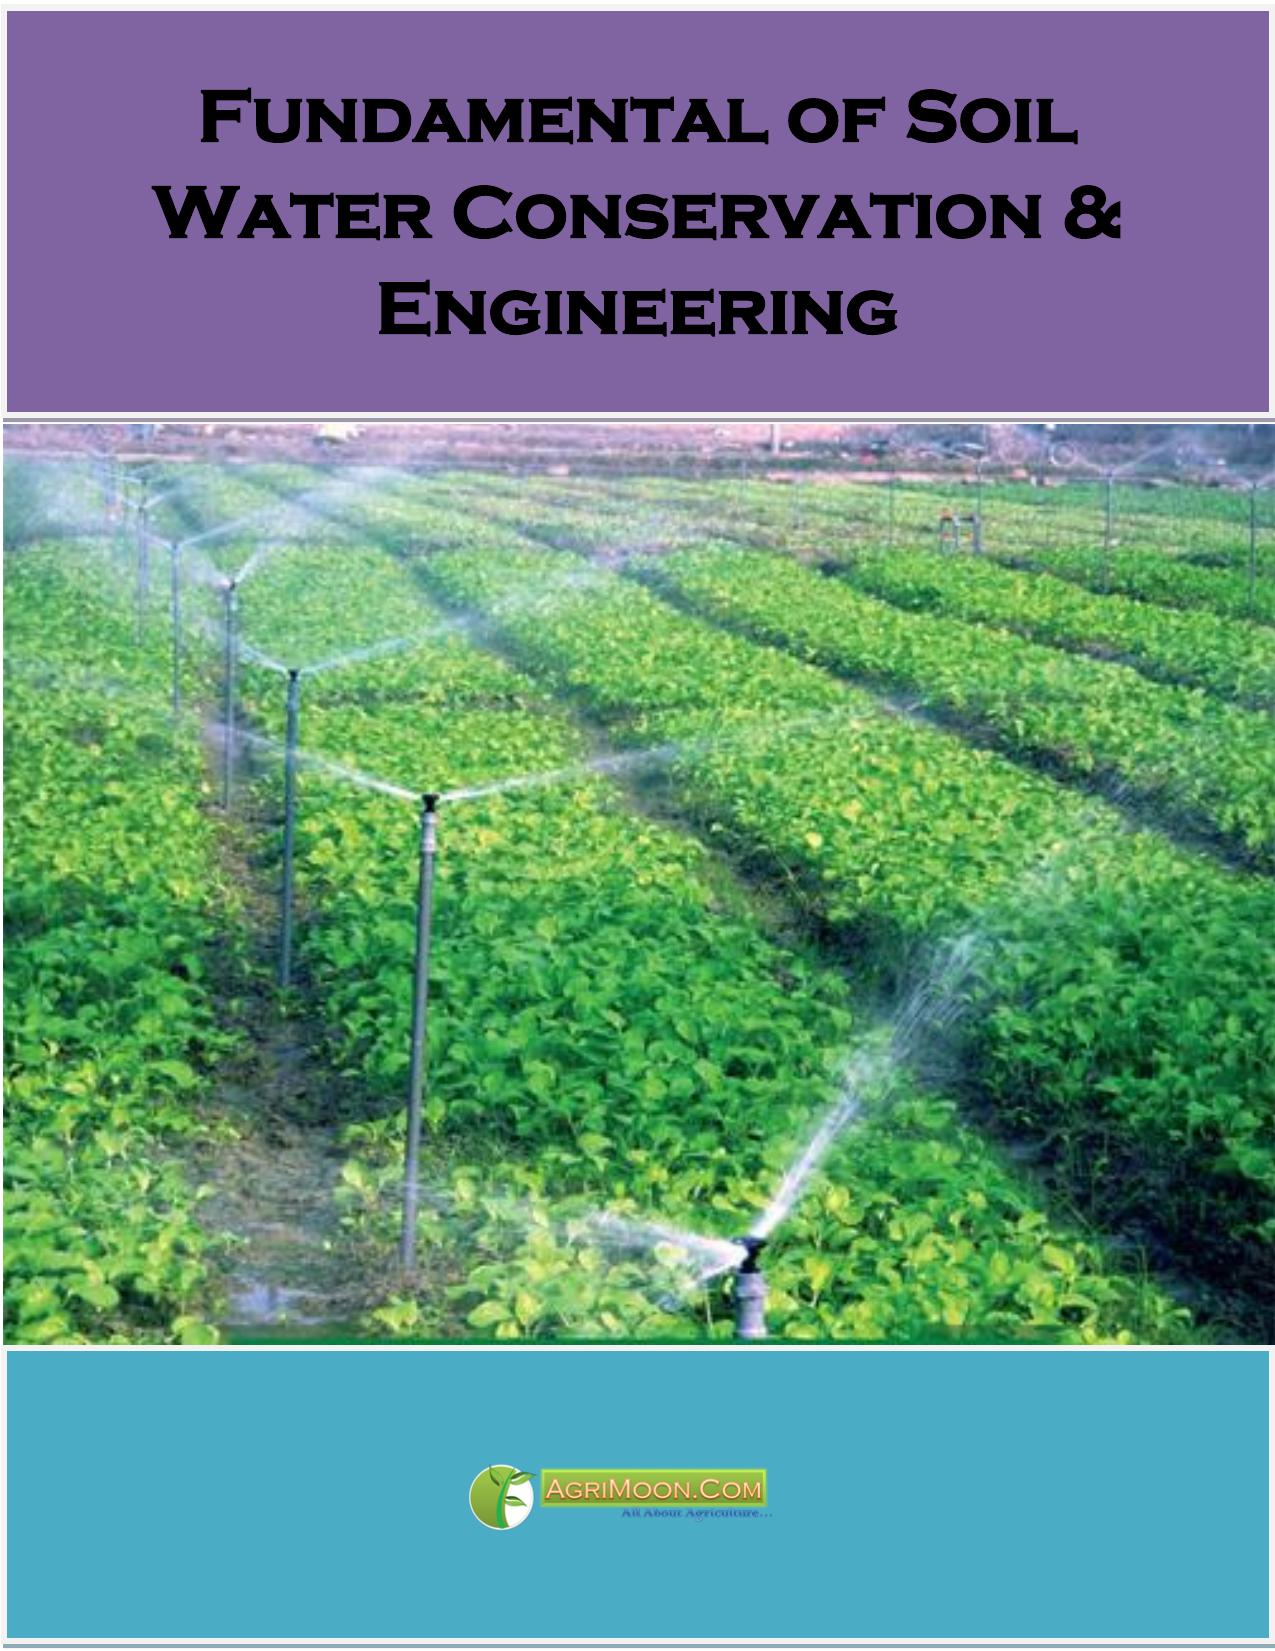 Fundamental of Soil Water Conservation & Engineering